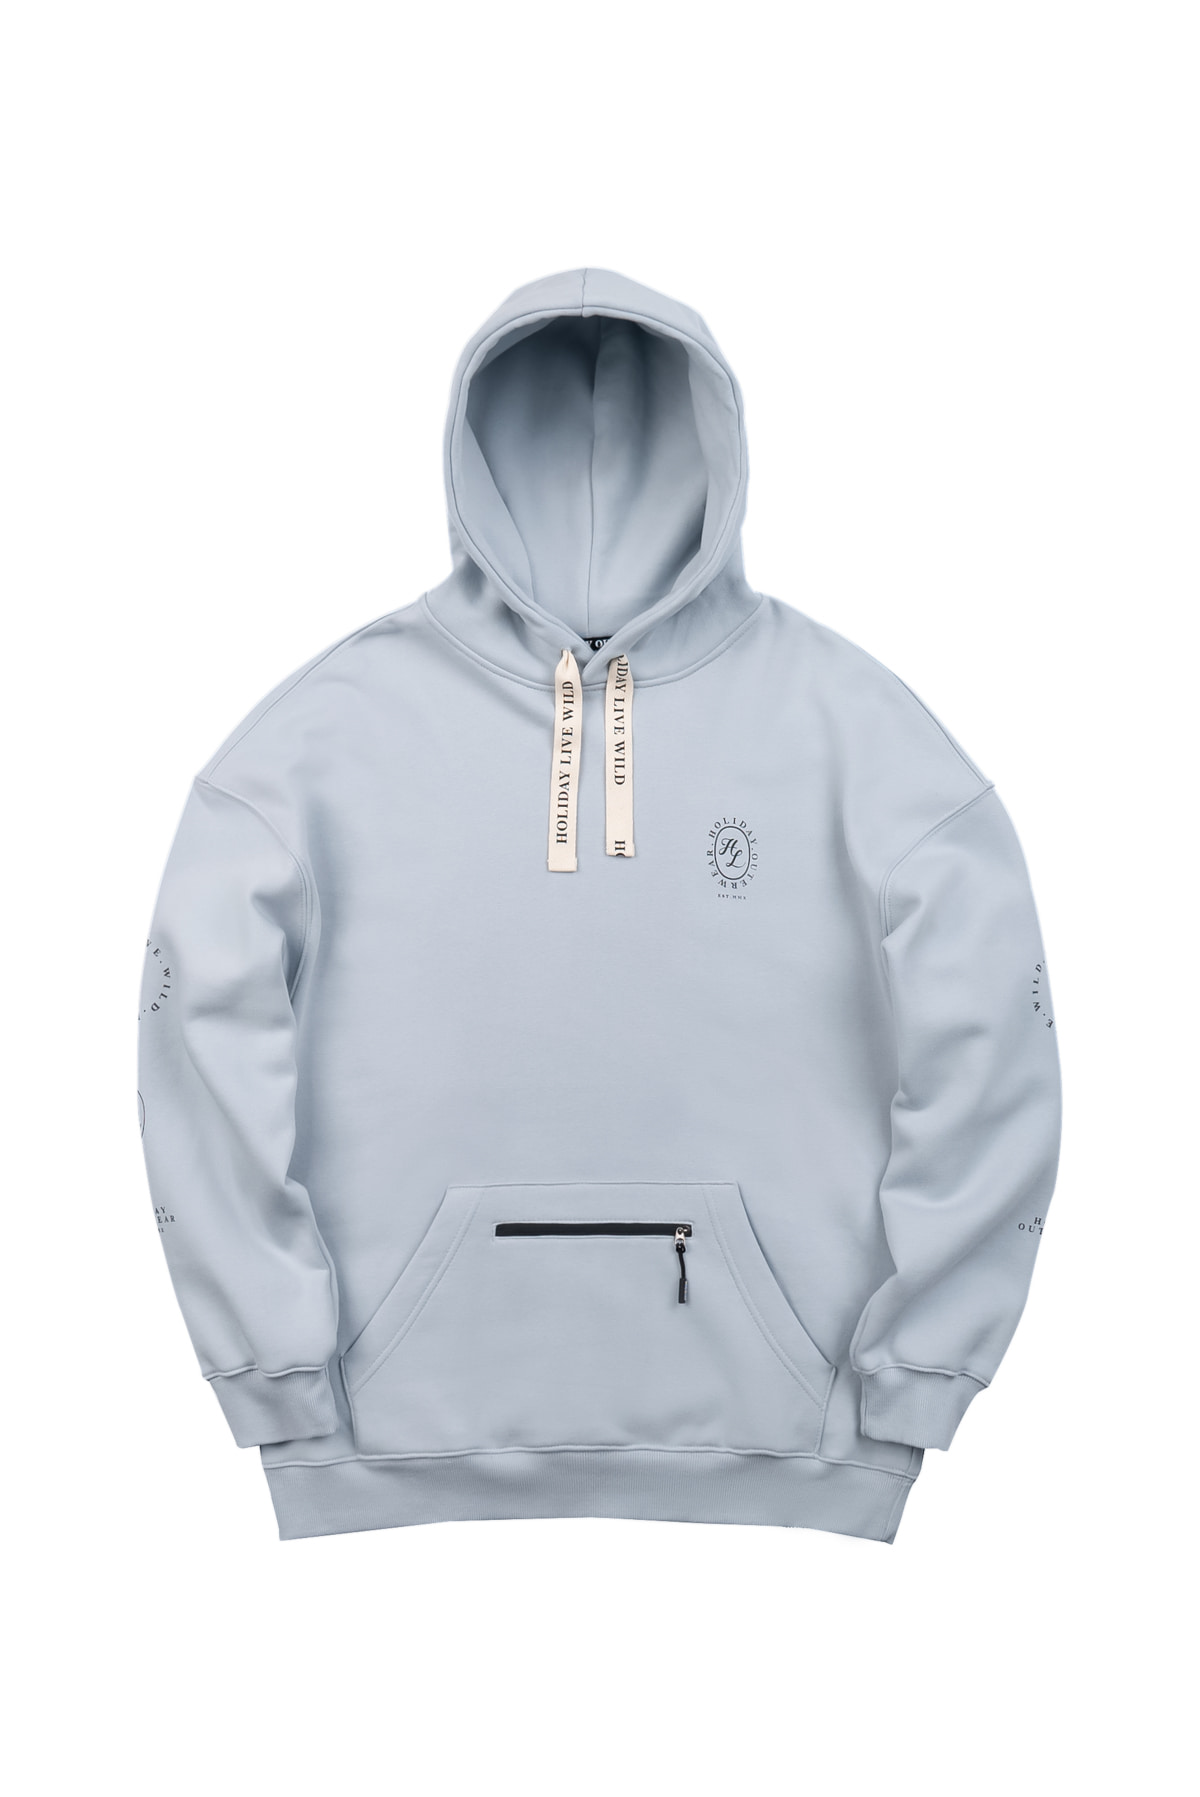 COMPOSTION HOODIE-POWDER BLUEHOLIDAY OUTERWEAR